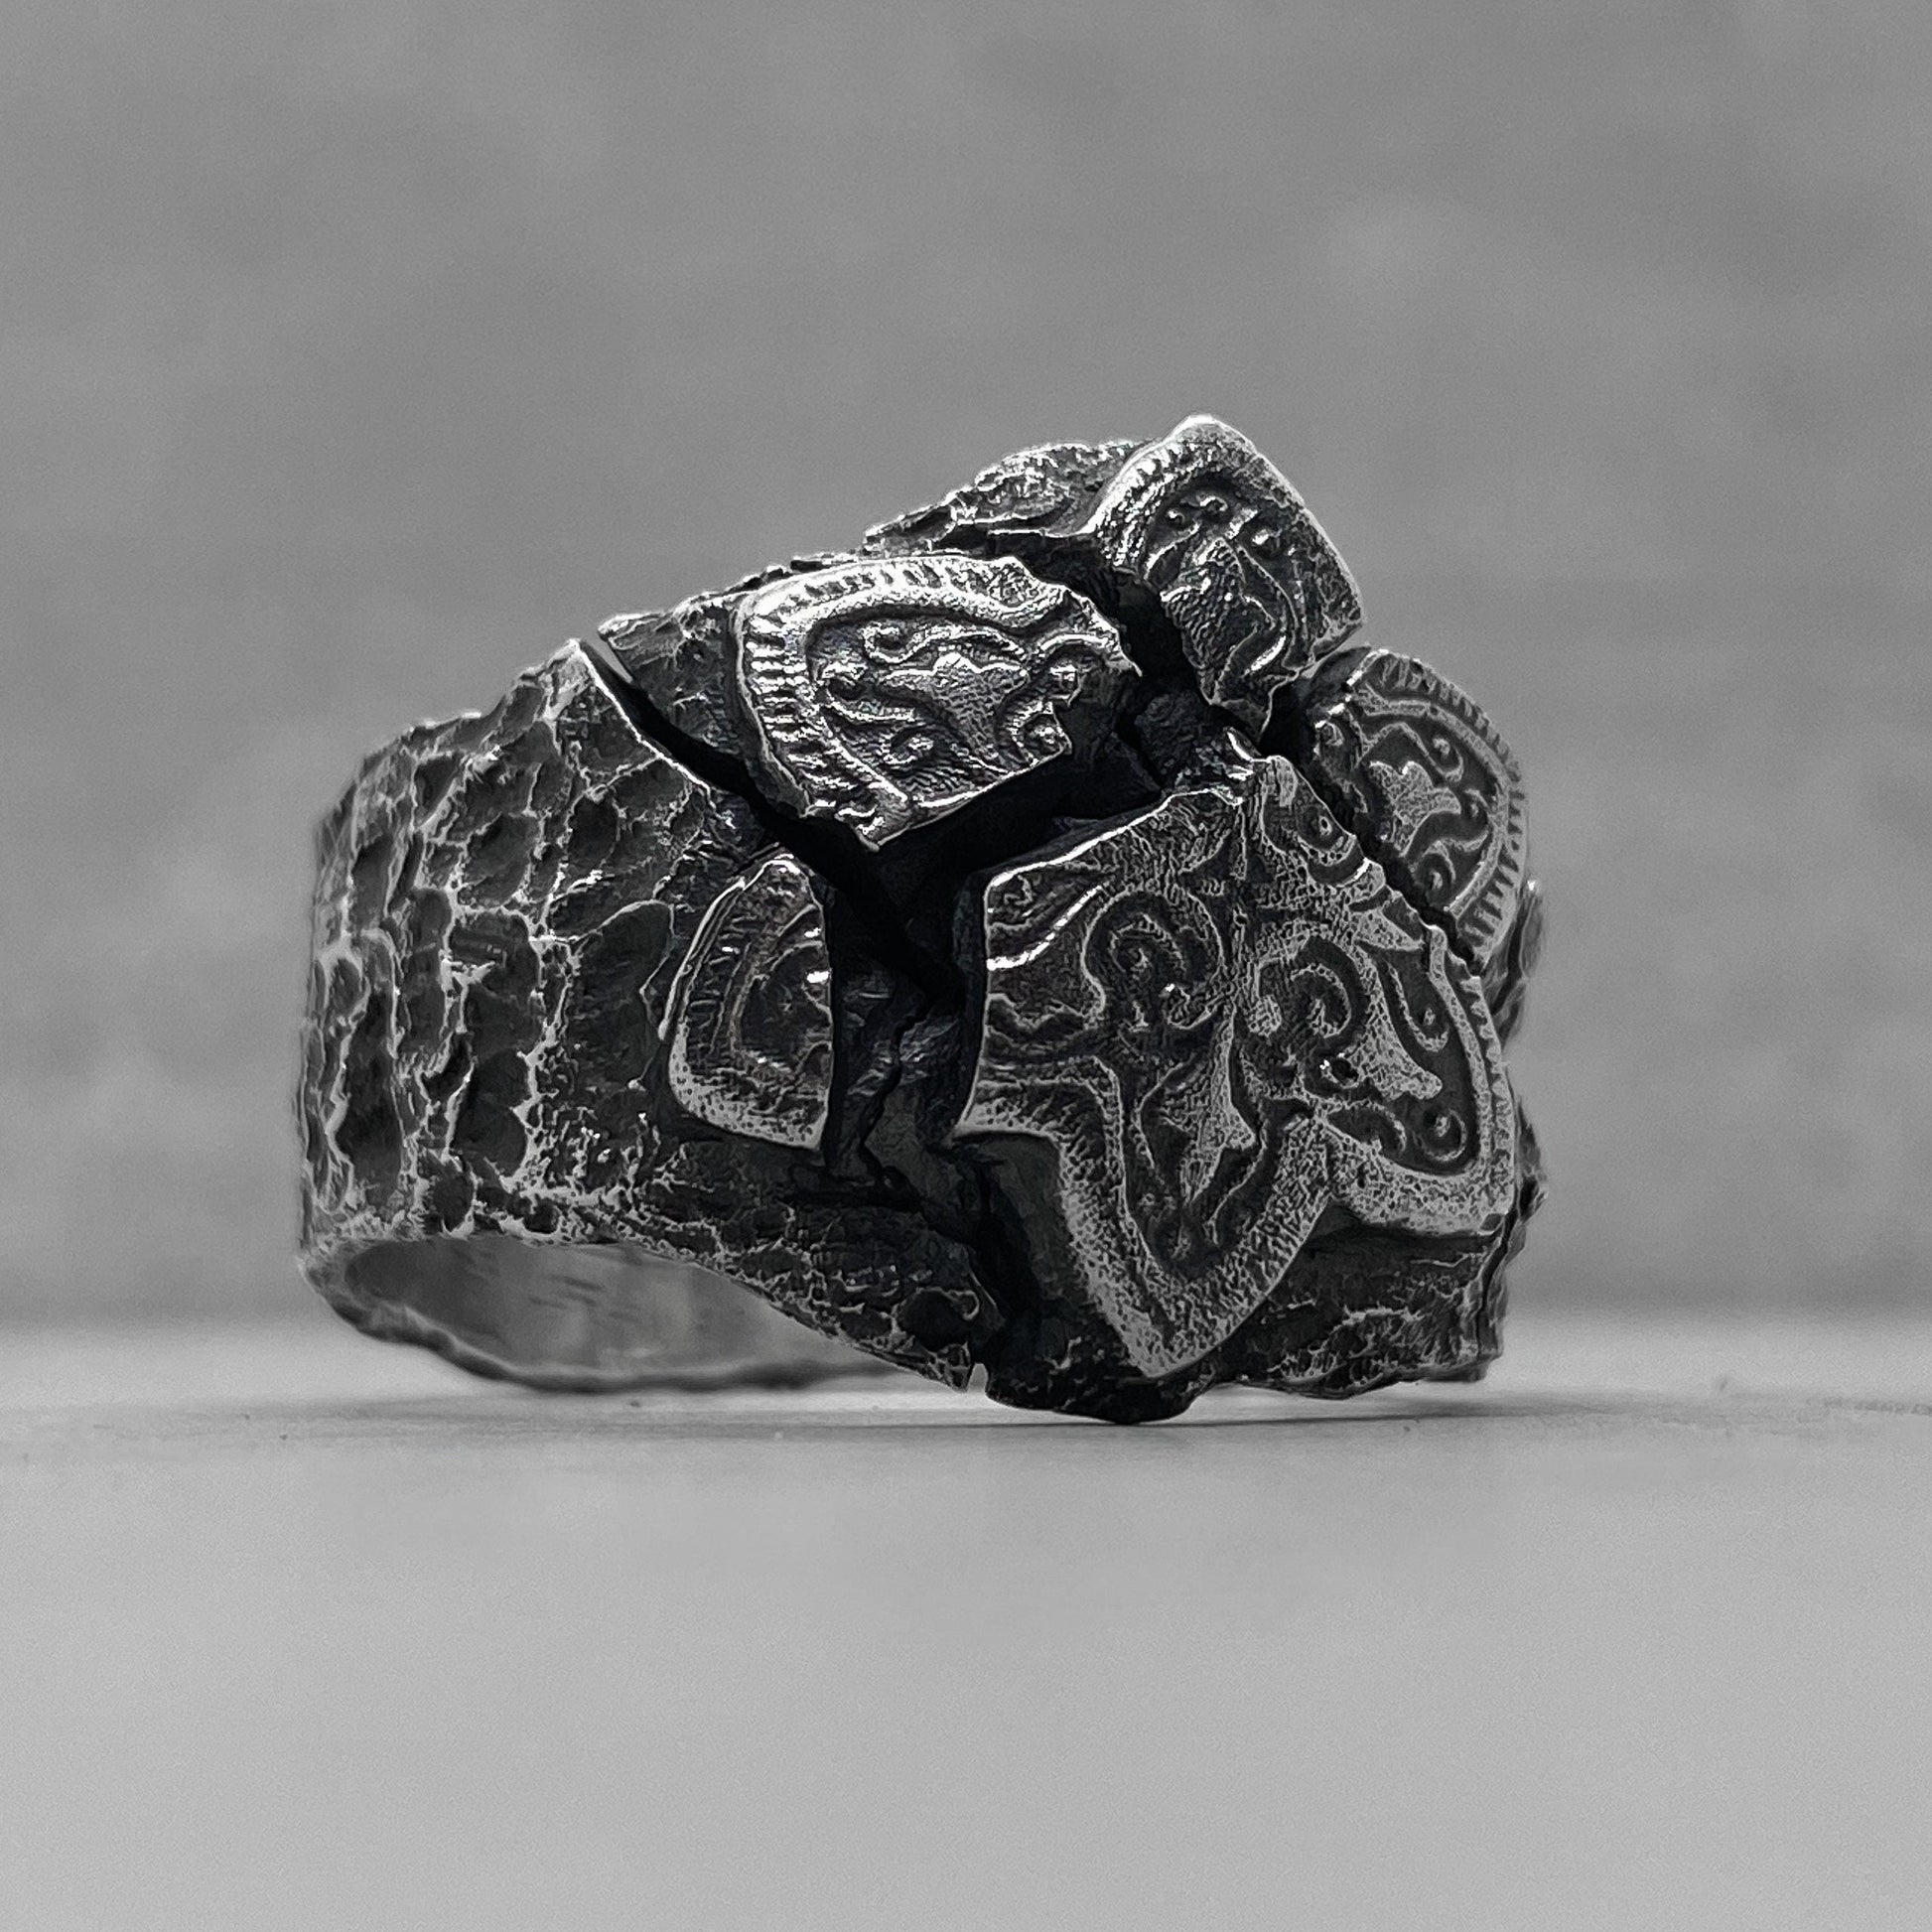 Mosaic ring - unusual ring with an oriental pattern and cracks Rings with cracks and patterns Project50g 